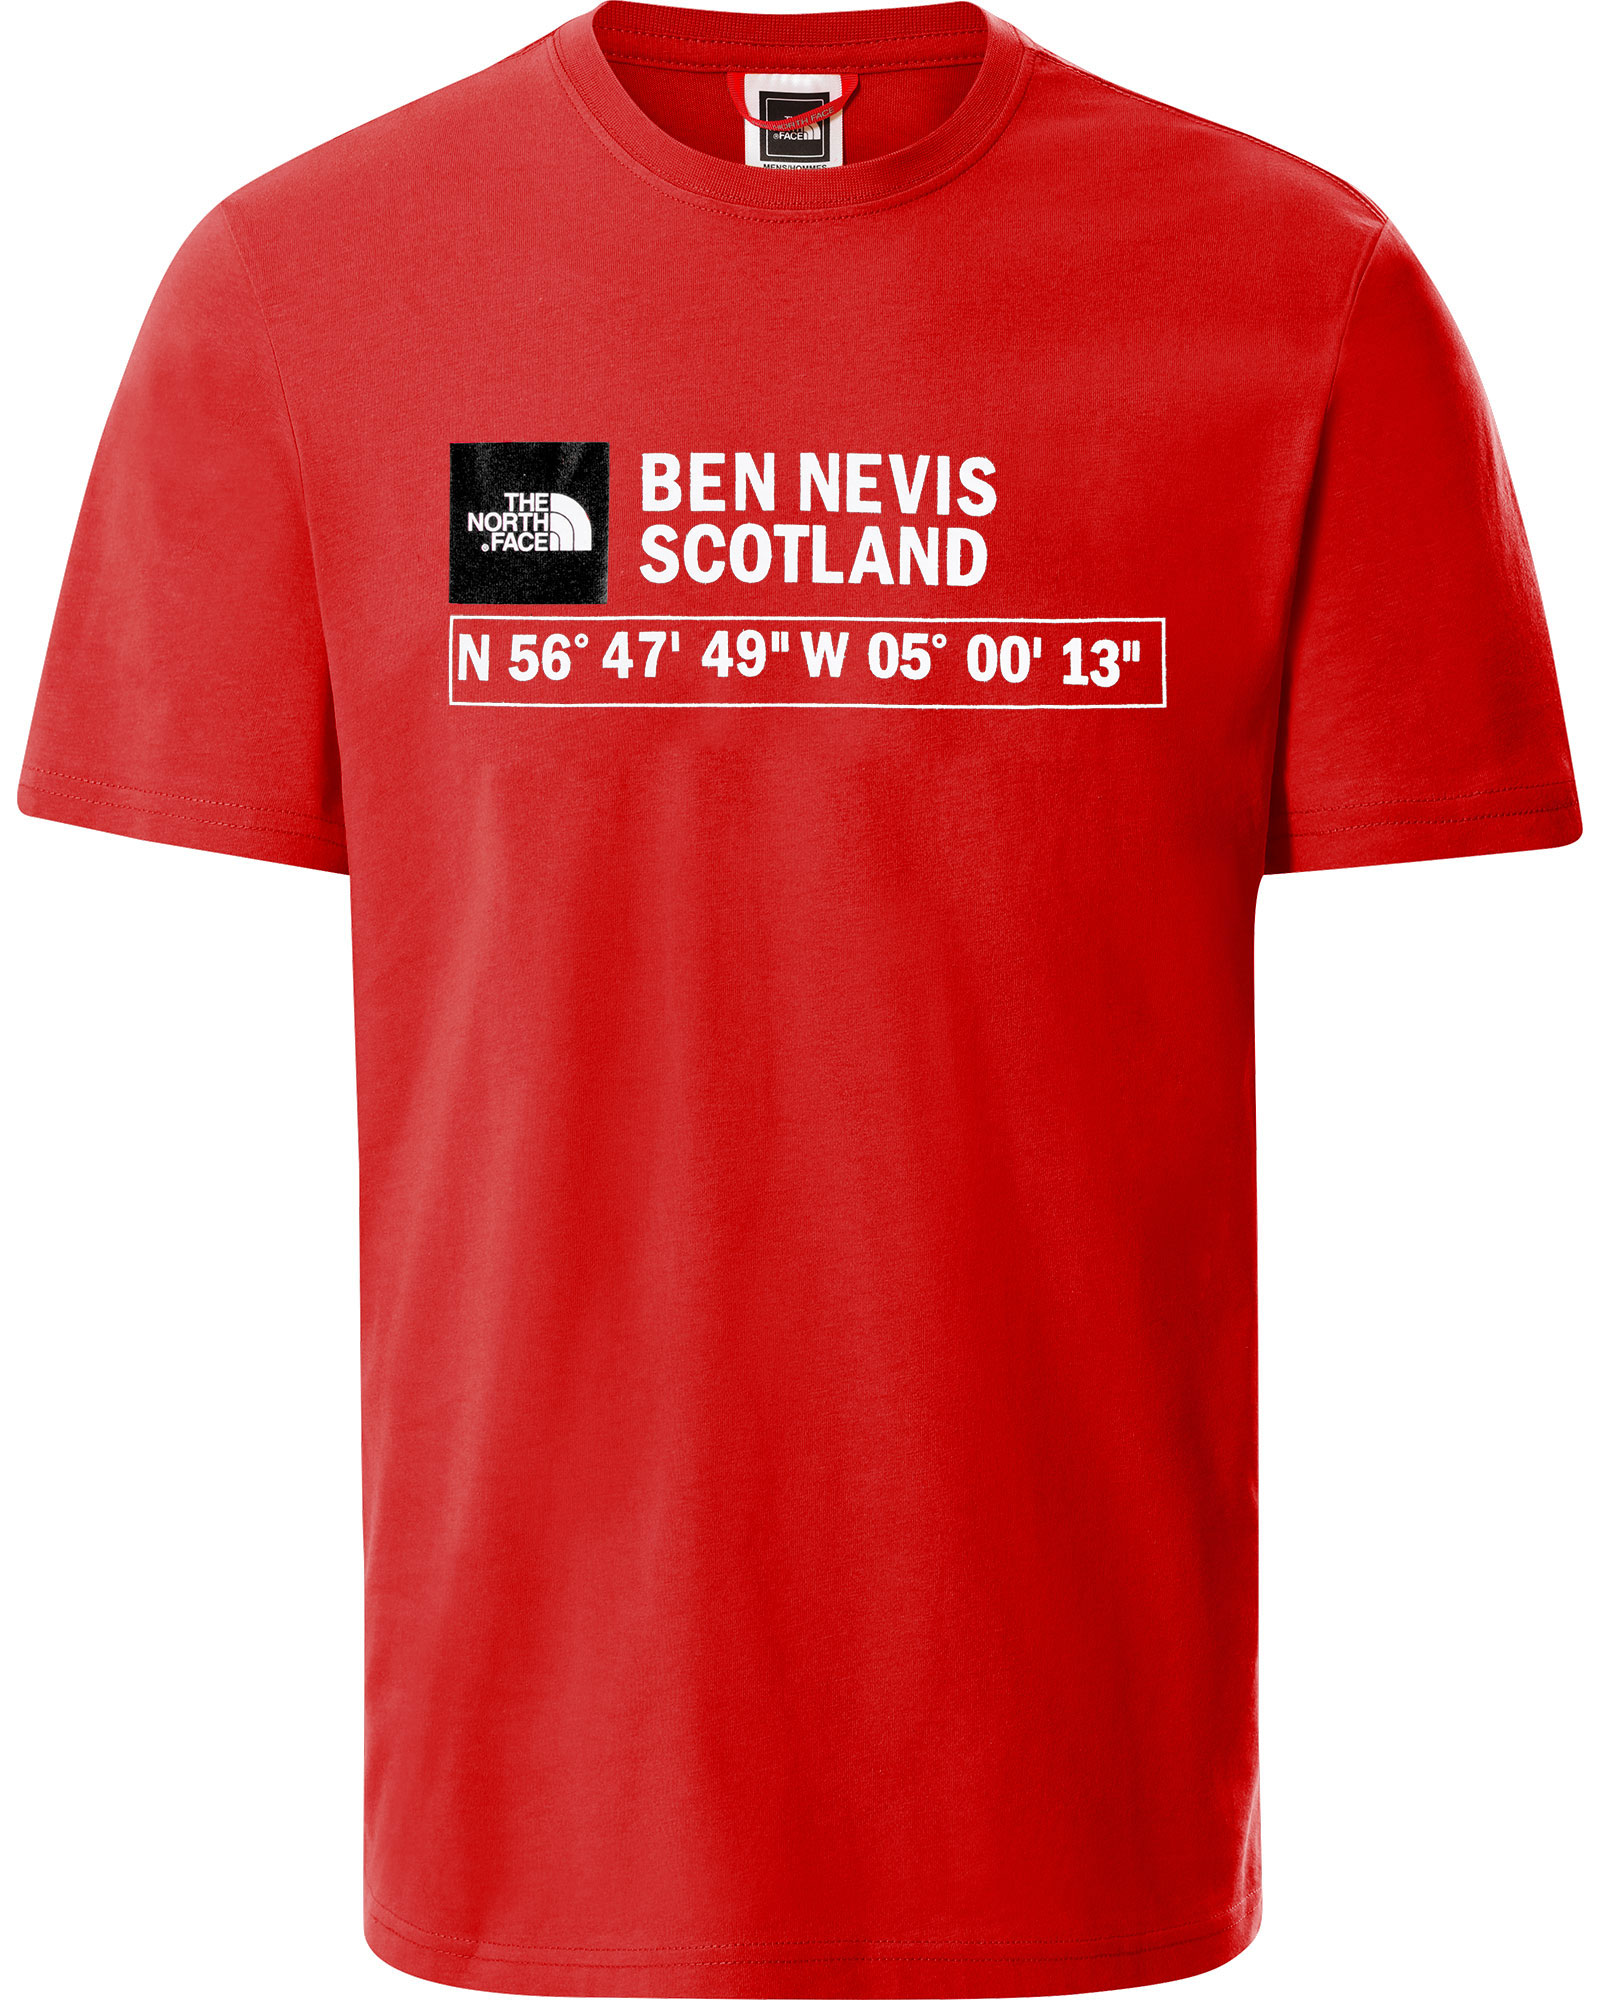 Product image of The North Face GPS Logo Men's T-Shirt Ben Nevis